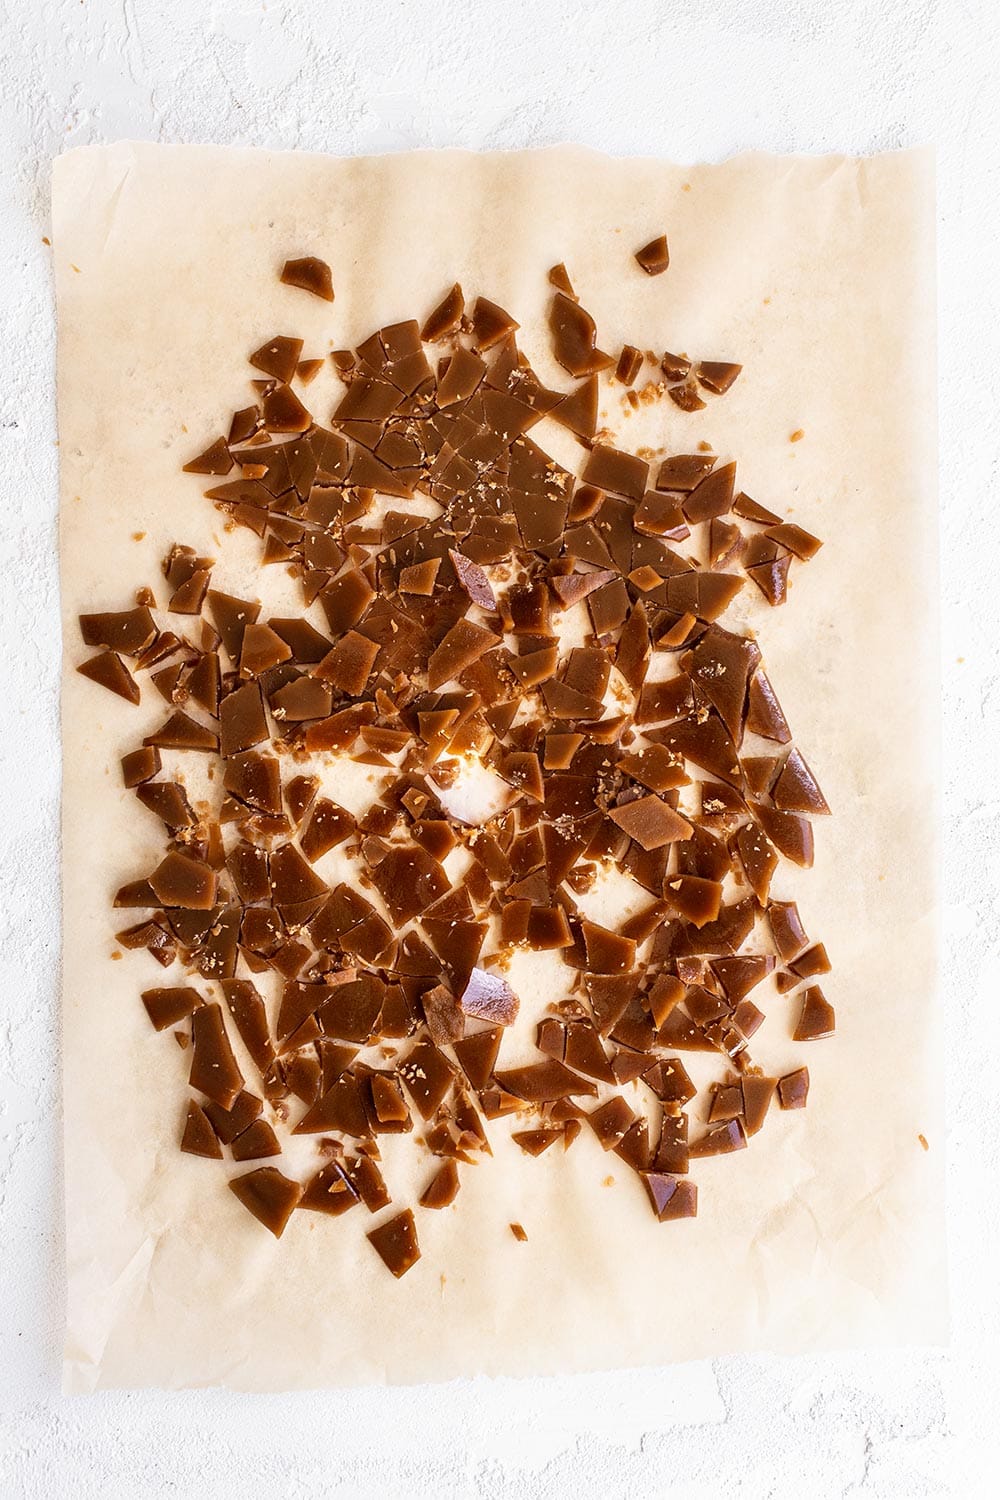 chopped up copycat Heath toffee bits on parchment paper